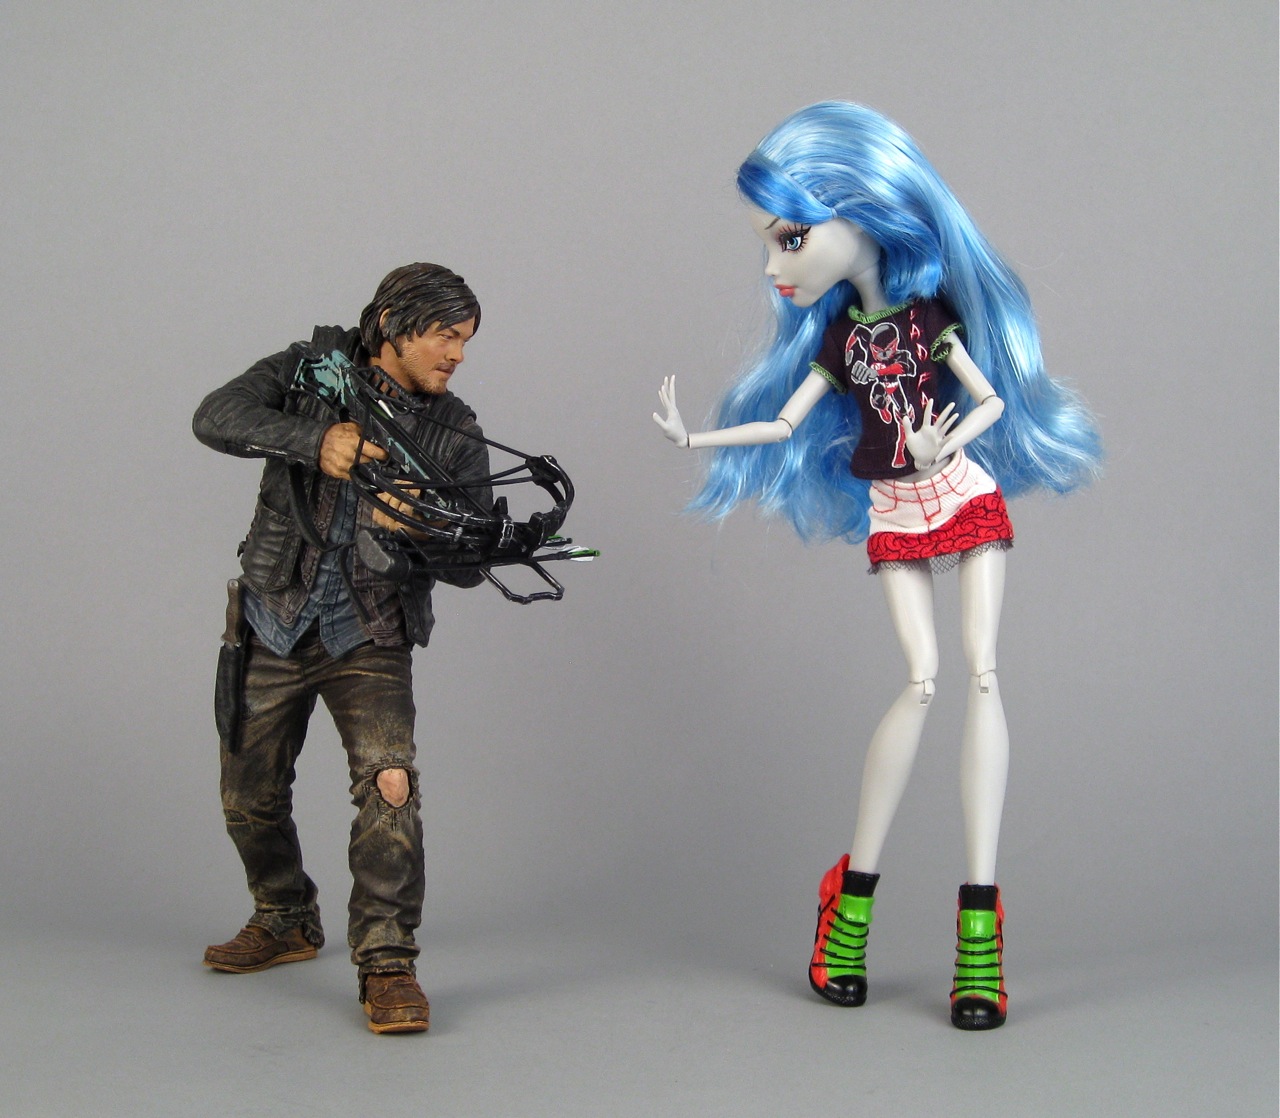 Daryl meets Ghoulia